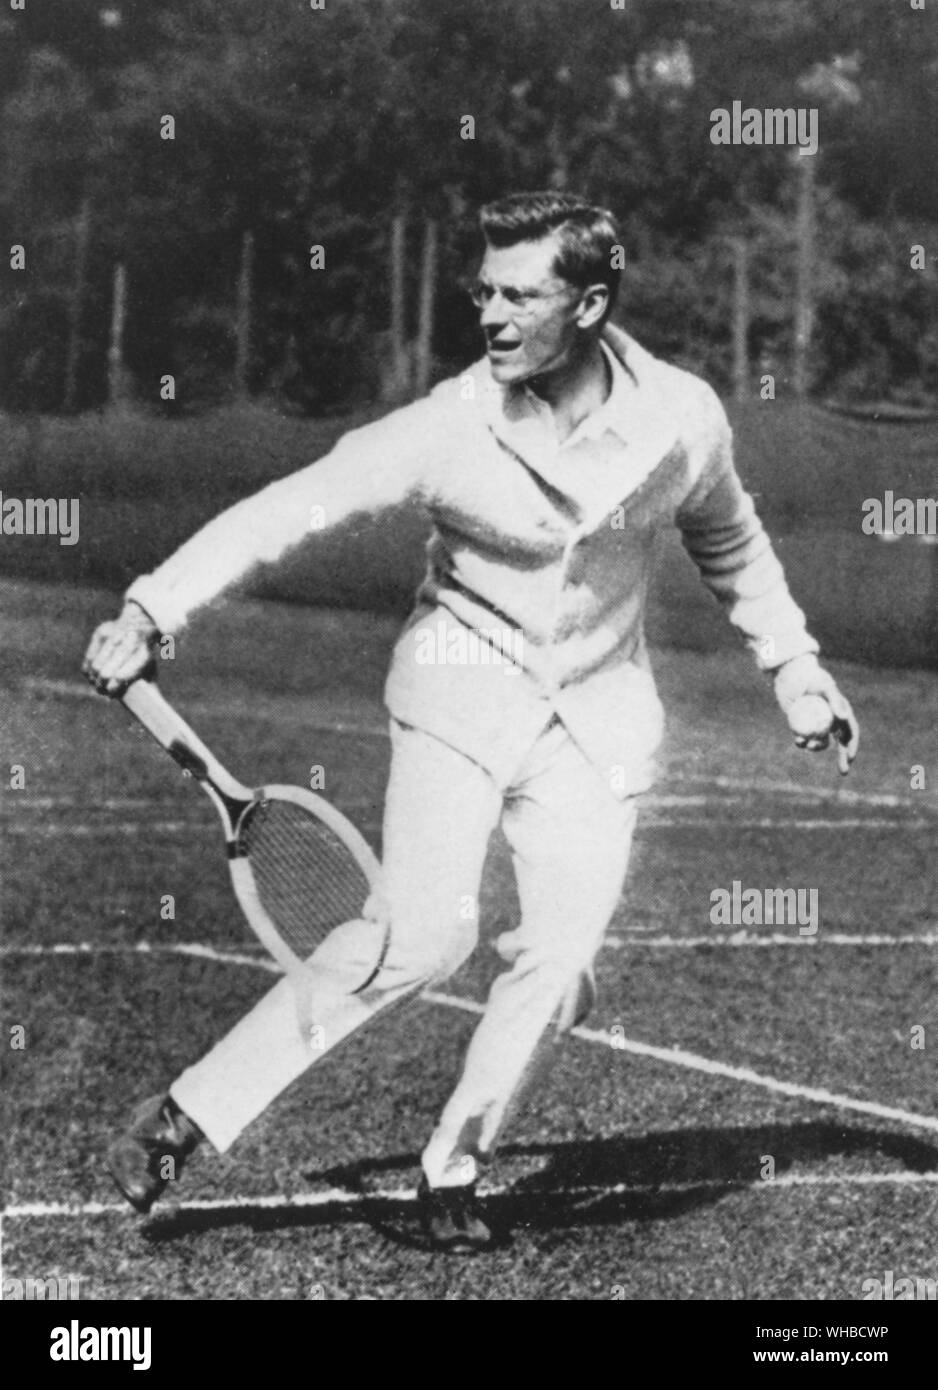 Karl H. Behr - Karl Howell Behr was a tennis player in the early 1900s in the United States of America. Graduated in 1905 from Yale University and became a lawyer. He was employeed at 40 Wall Street (ca. 1912). He was the brother of Max H. Behr, the well-known golfer. On the night of April 14, 1912, Behr was on the Titanic in first class but survived the sinking.. Stock Photo